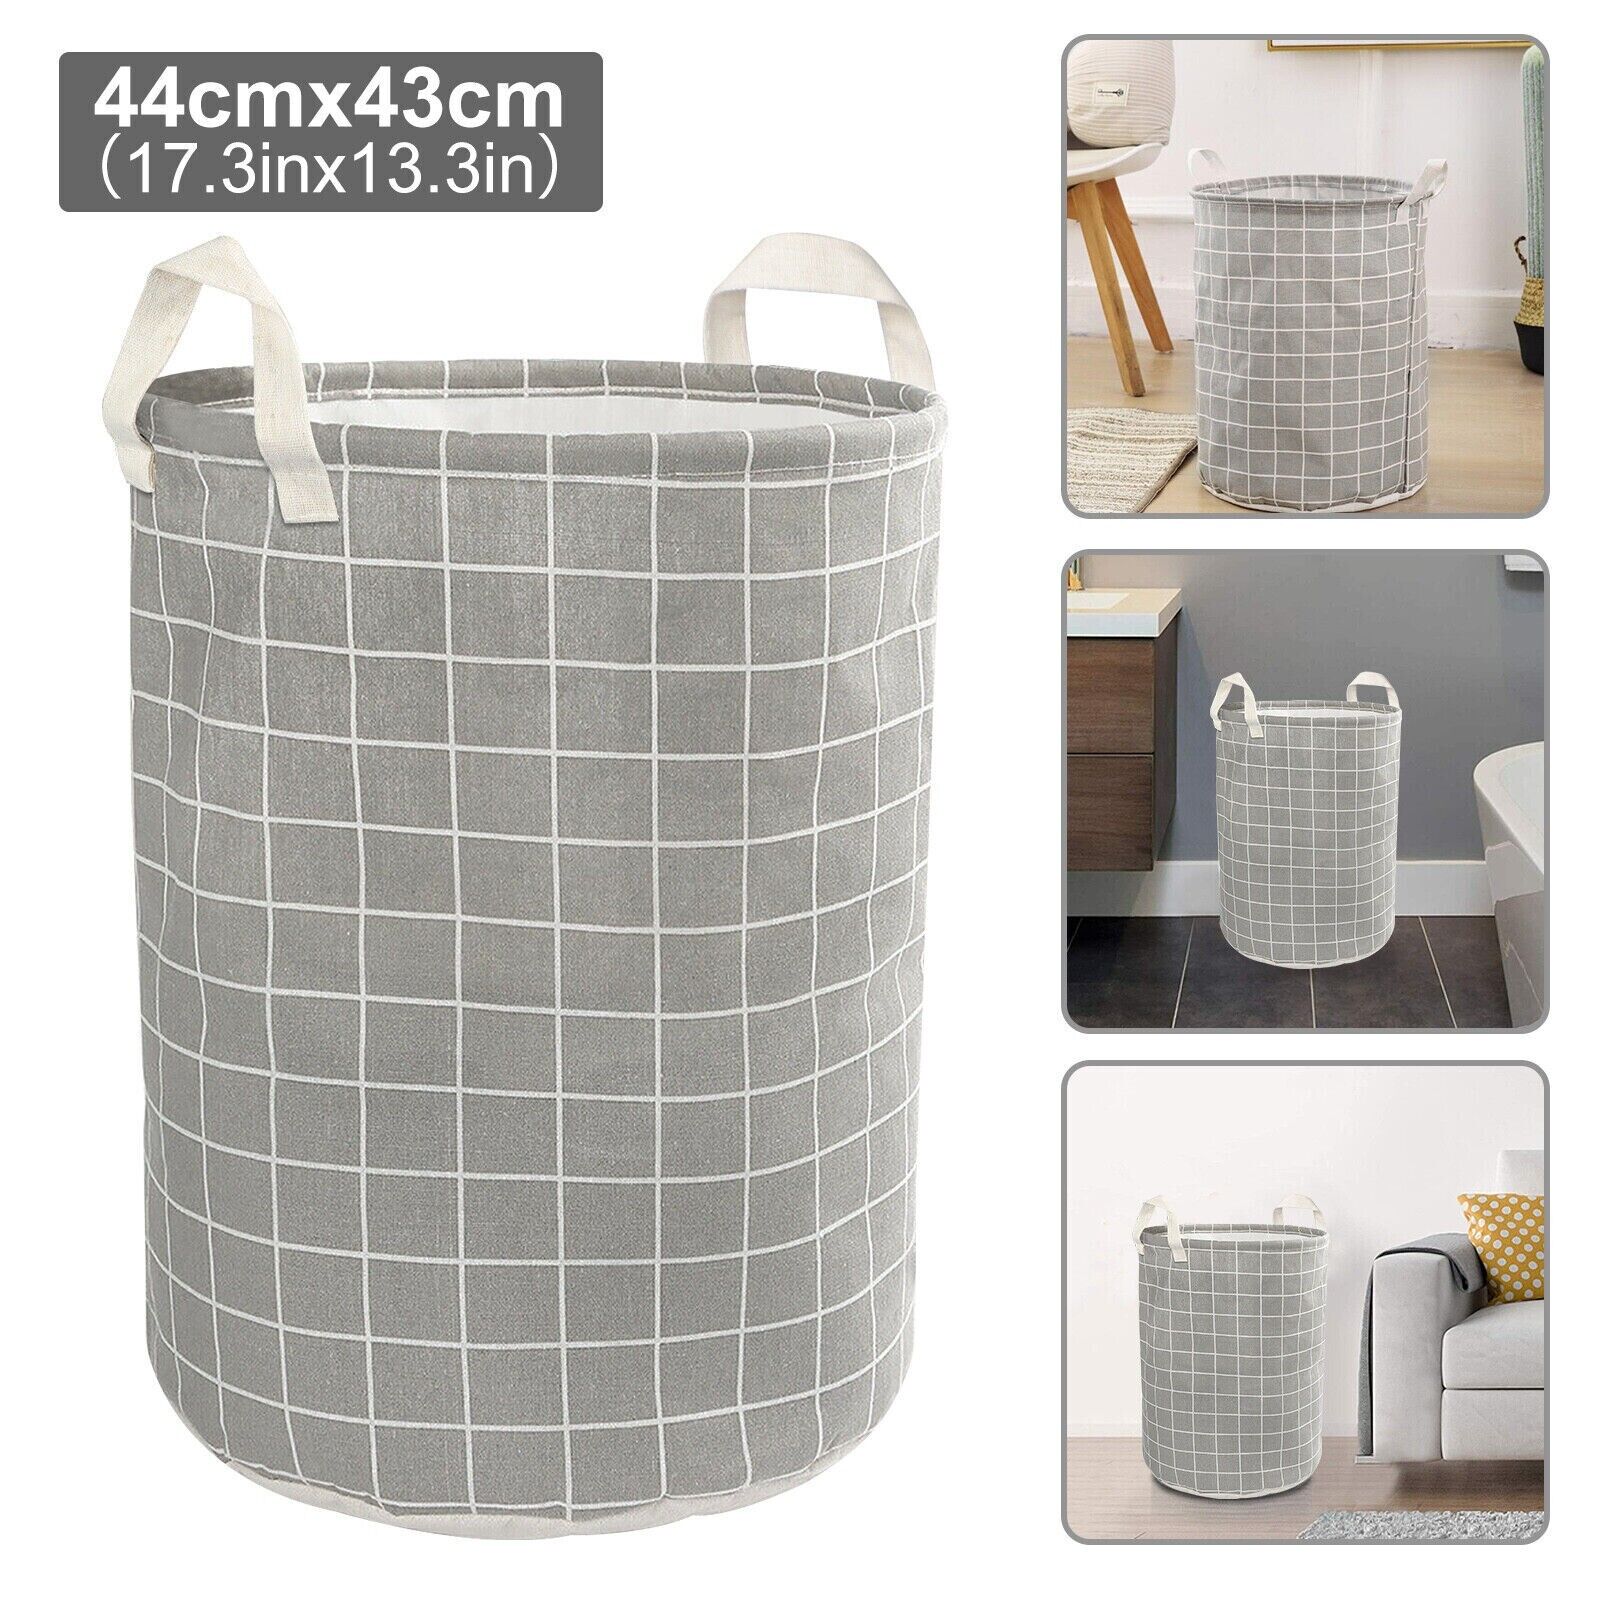 Collapsible laundry basket size